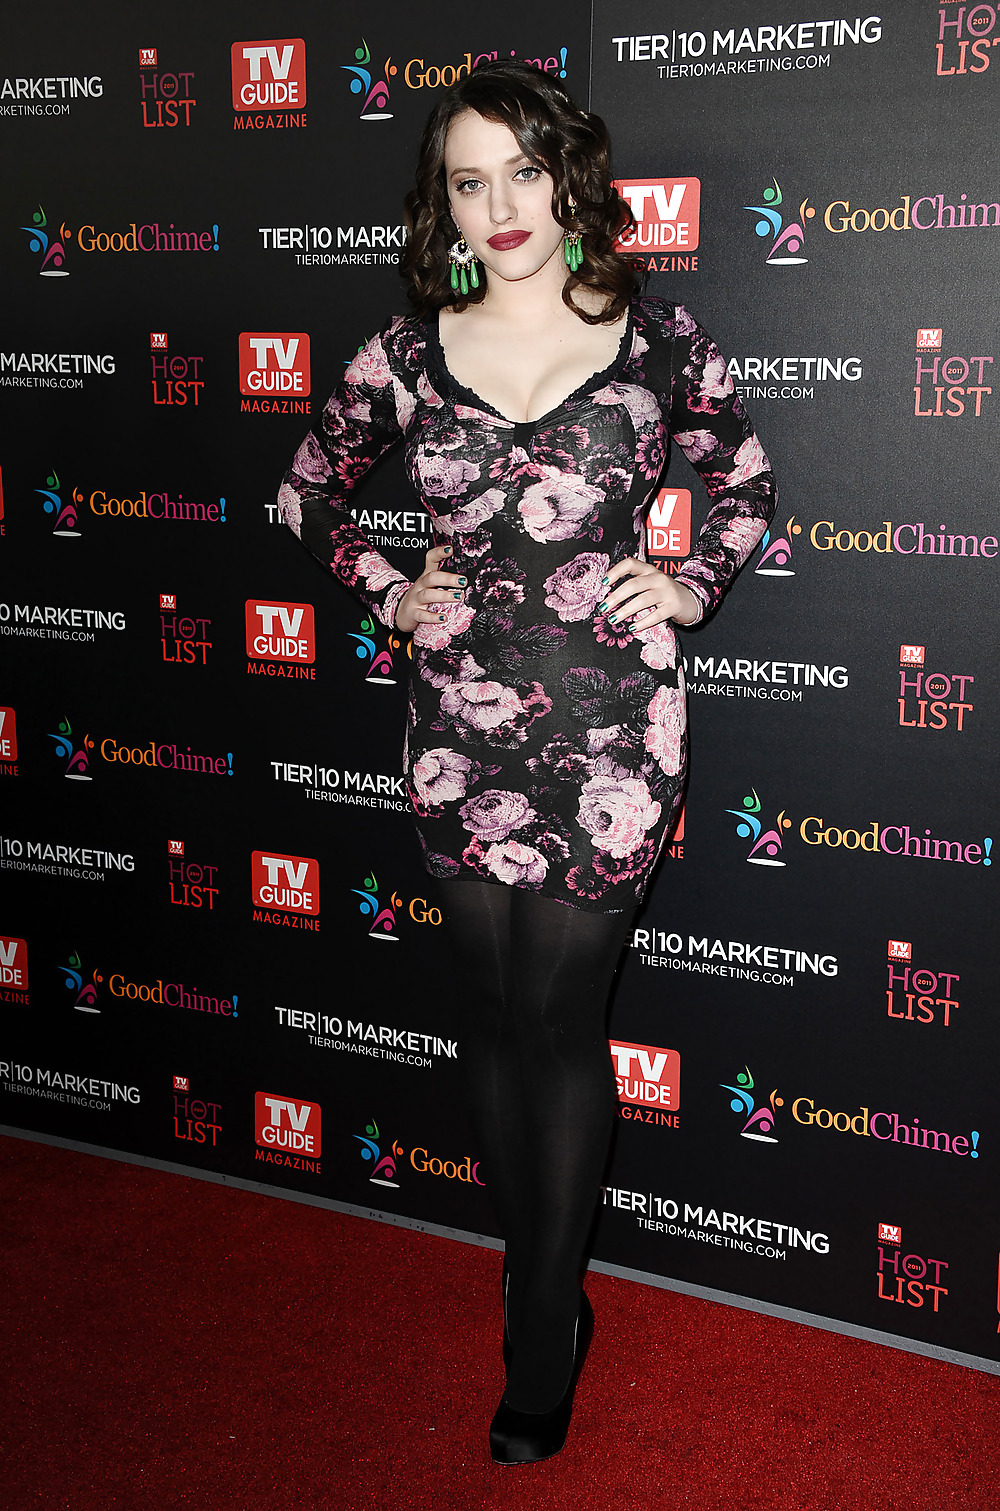 Kat Dennings - TV Guide Magazines Hot List party in LA #6757968